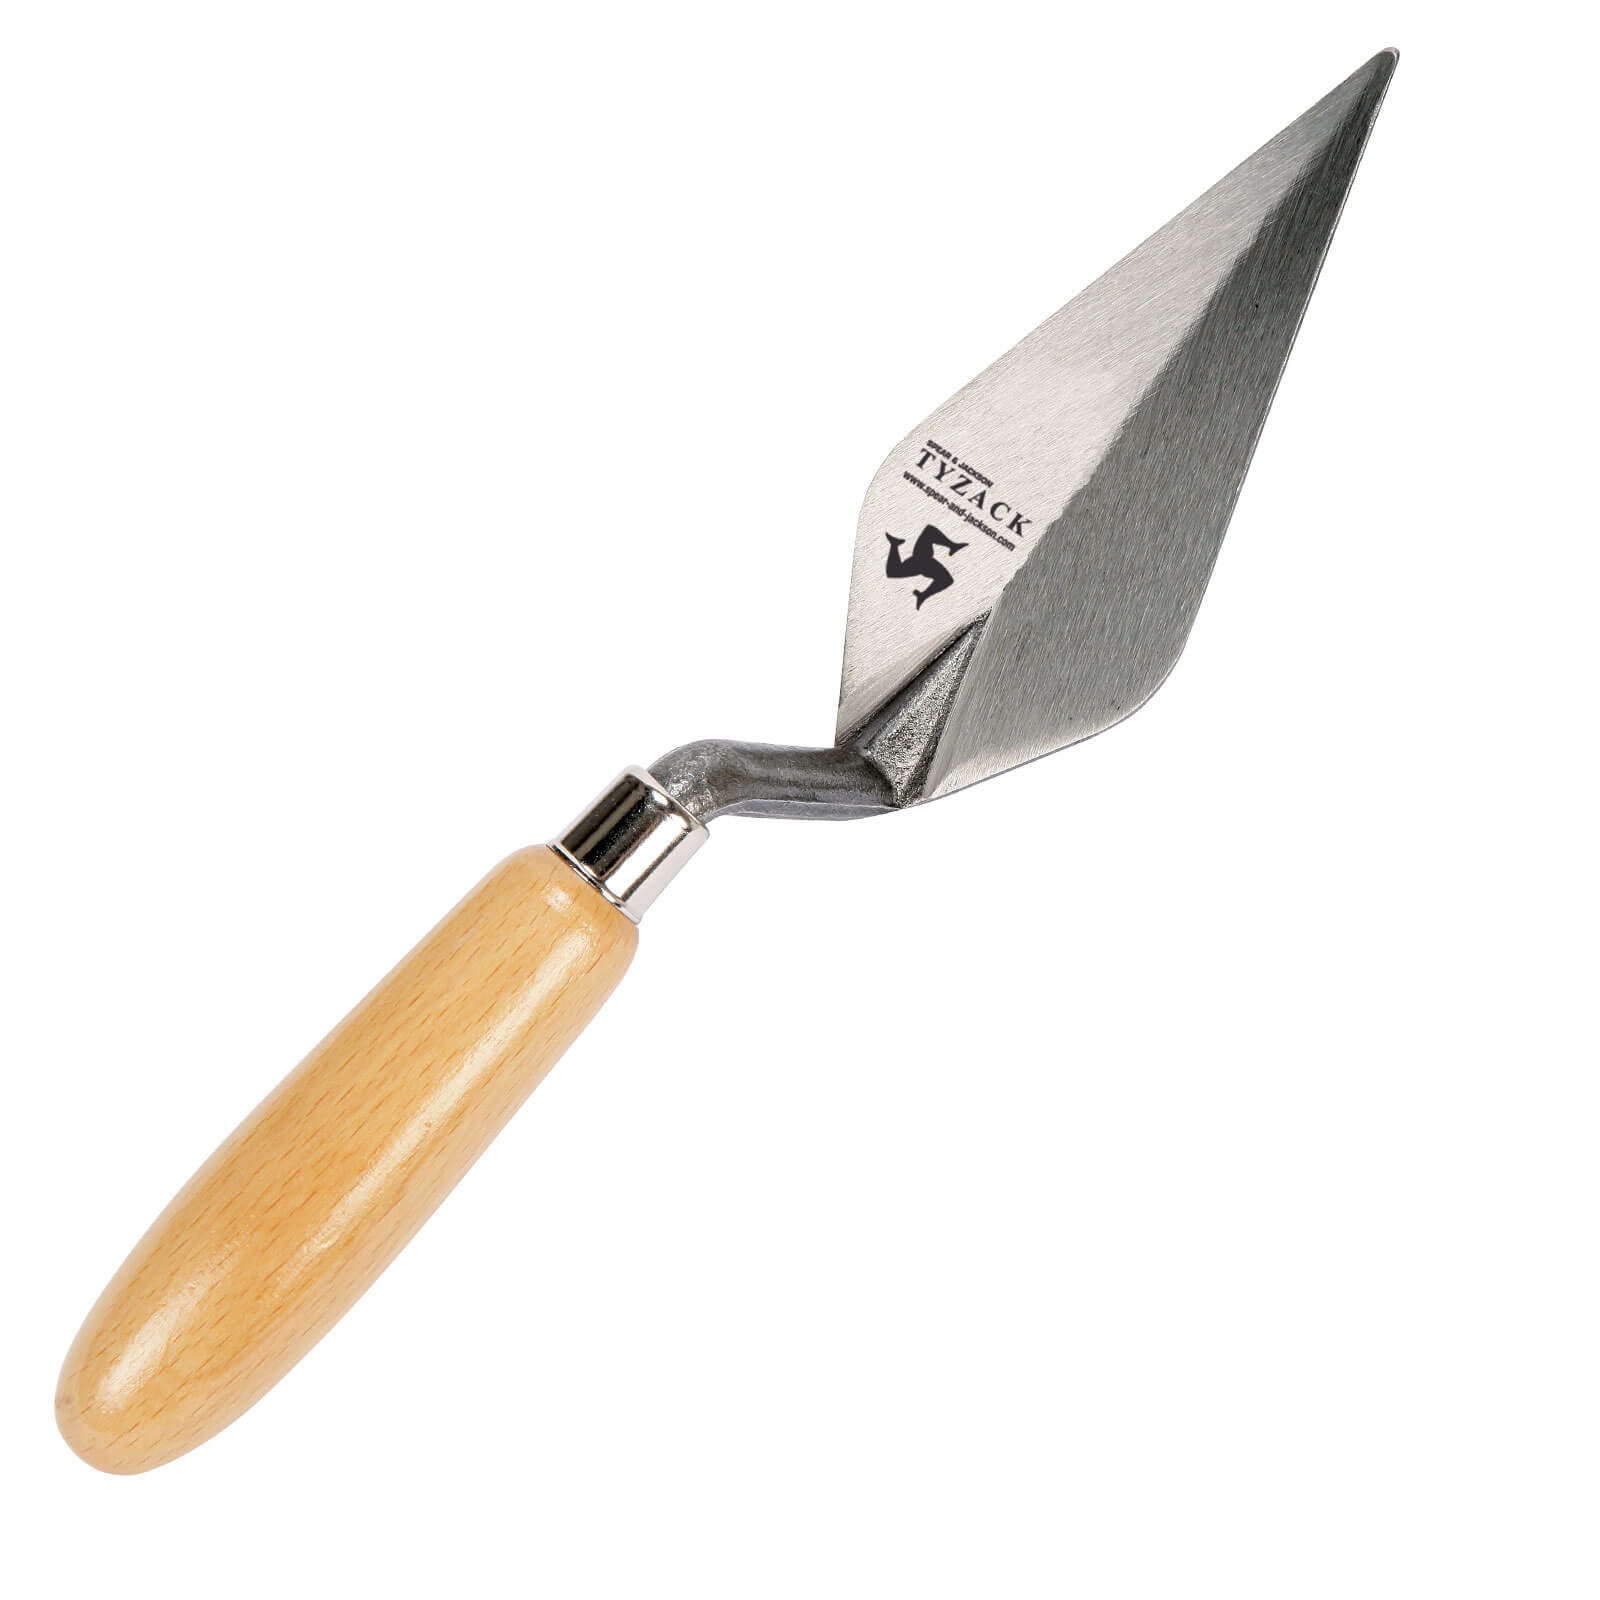 WHS Tyzack Pointing Trowel with Wooden Handle 5"